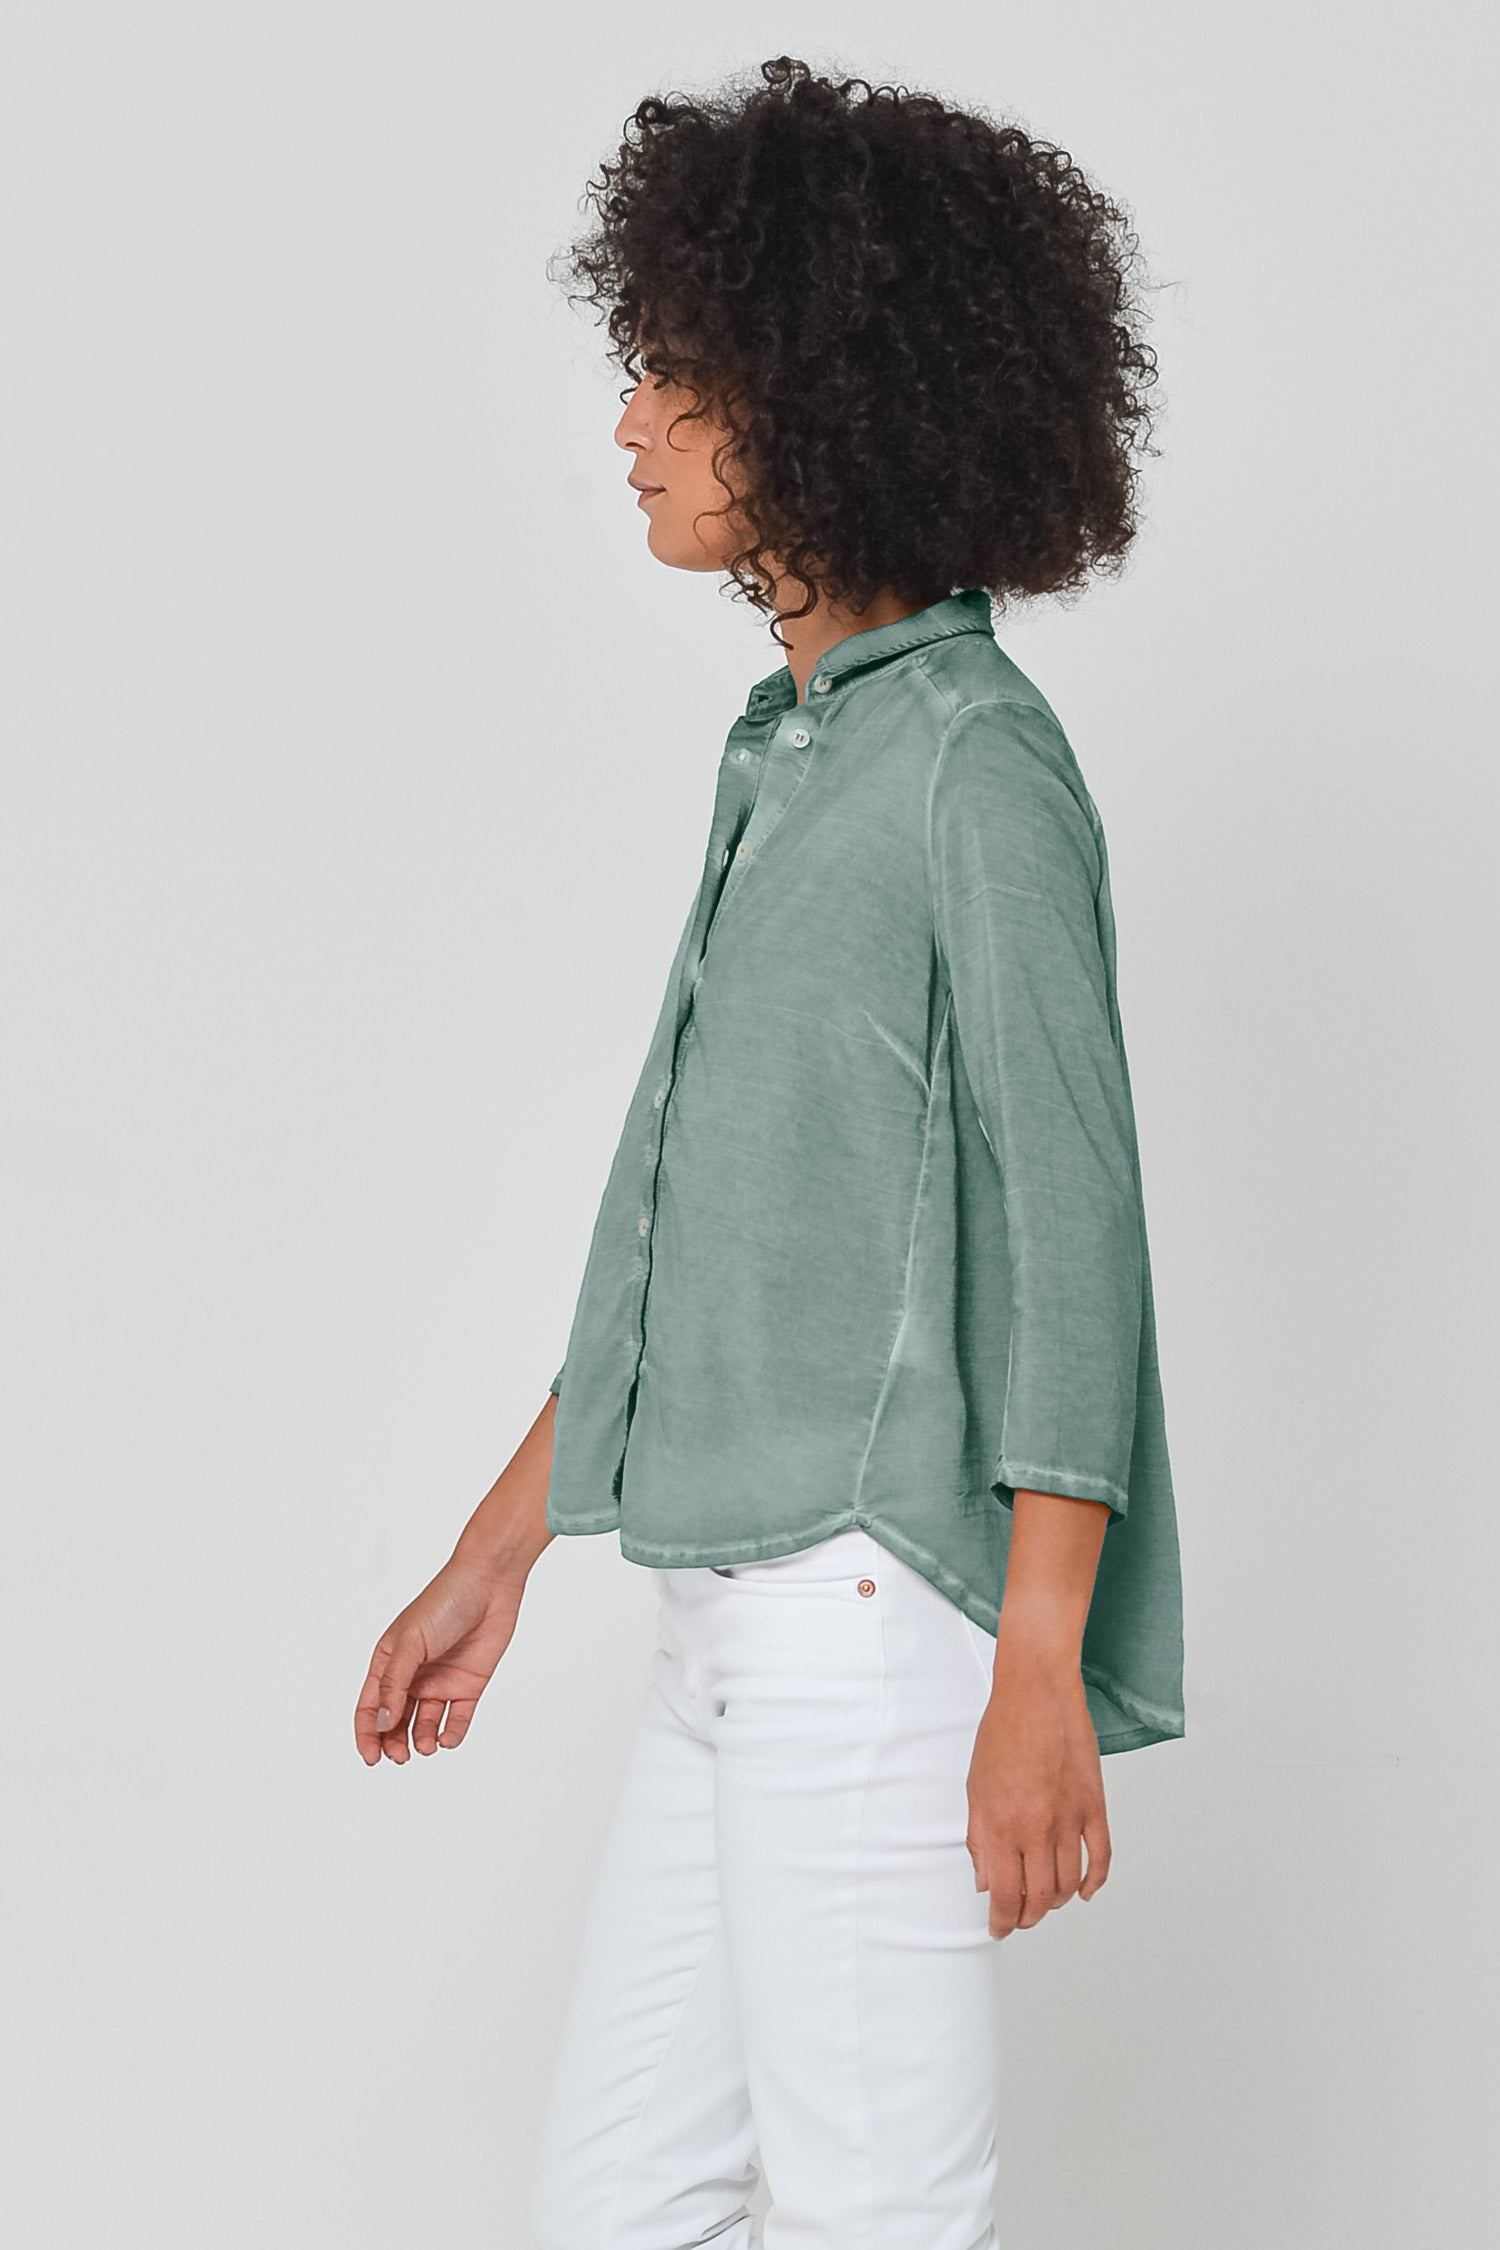 Merion Viscose Blouse in Shark - Shirts